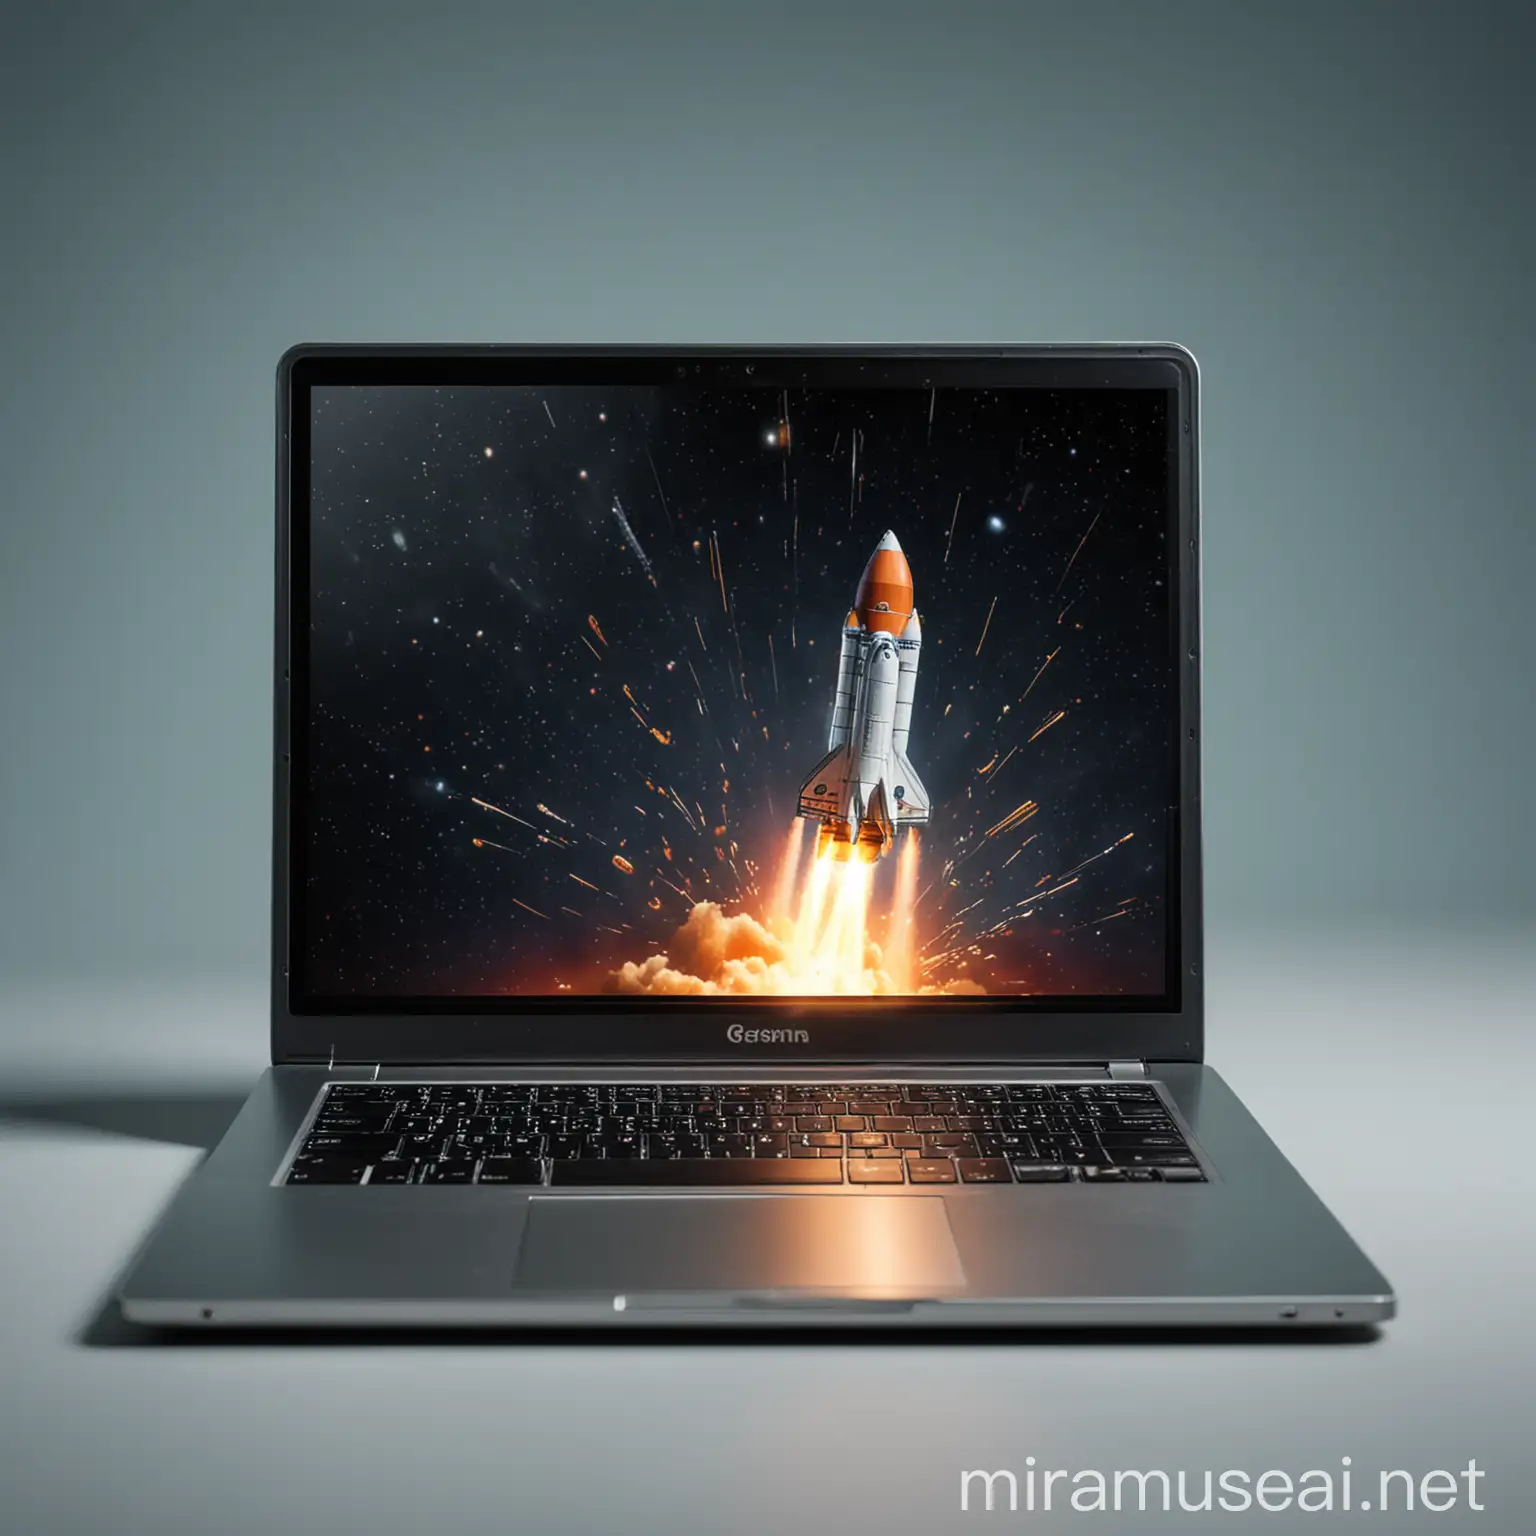 Laptop Screen Showing Small Rocket with Infinite Speed